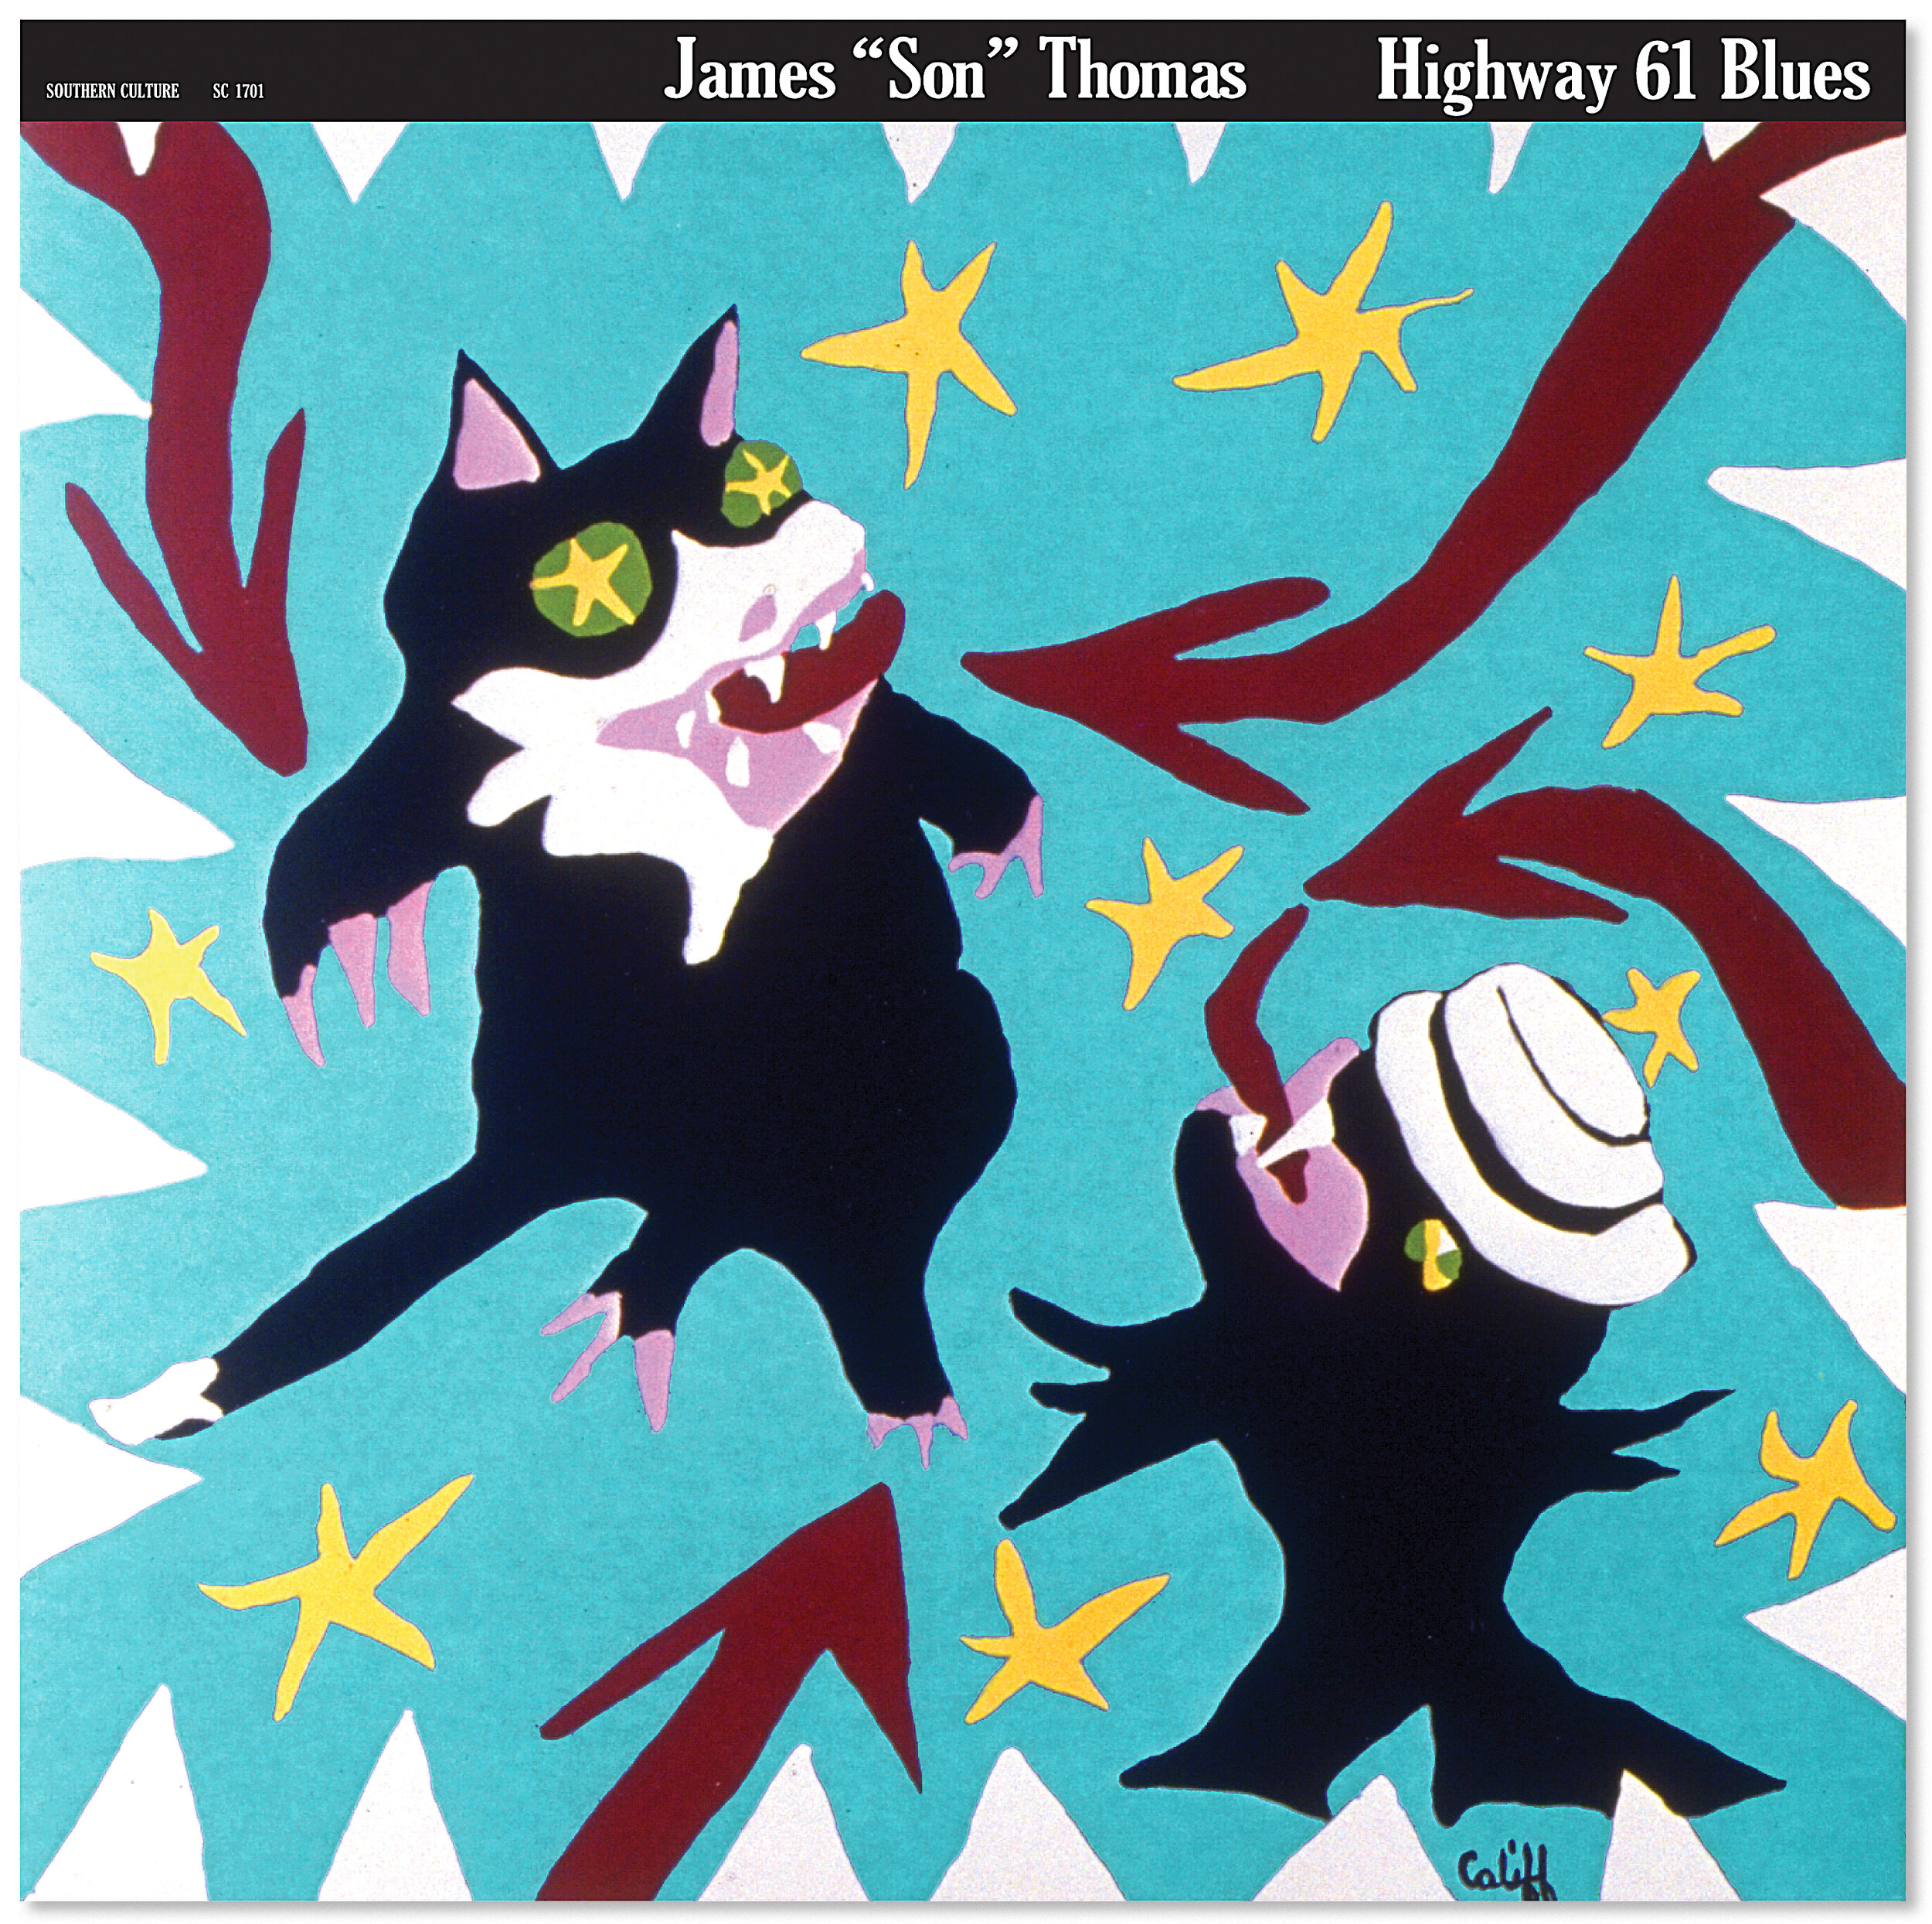  James “Son” Thomas  Highway 61 Blues  Center for the Study of Southern Culture Album Series  William Ferris  Oxford, Mississippi  Creative direction, concept, design and production supervision by Chuck Mitchell  Illustration by Mara Califf  Producti